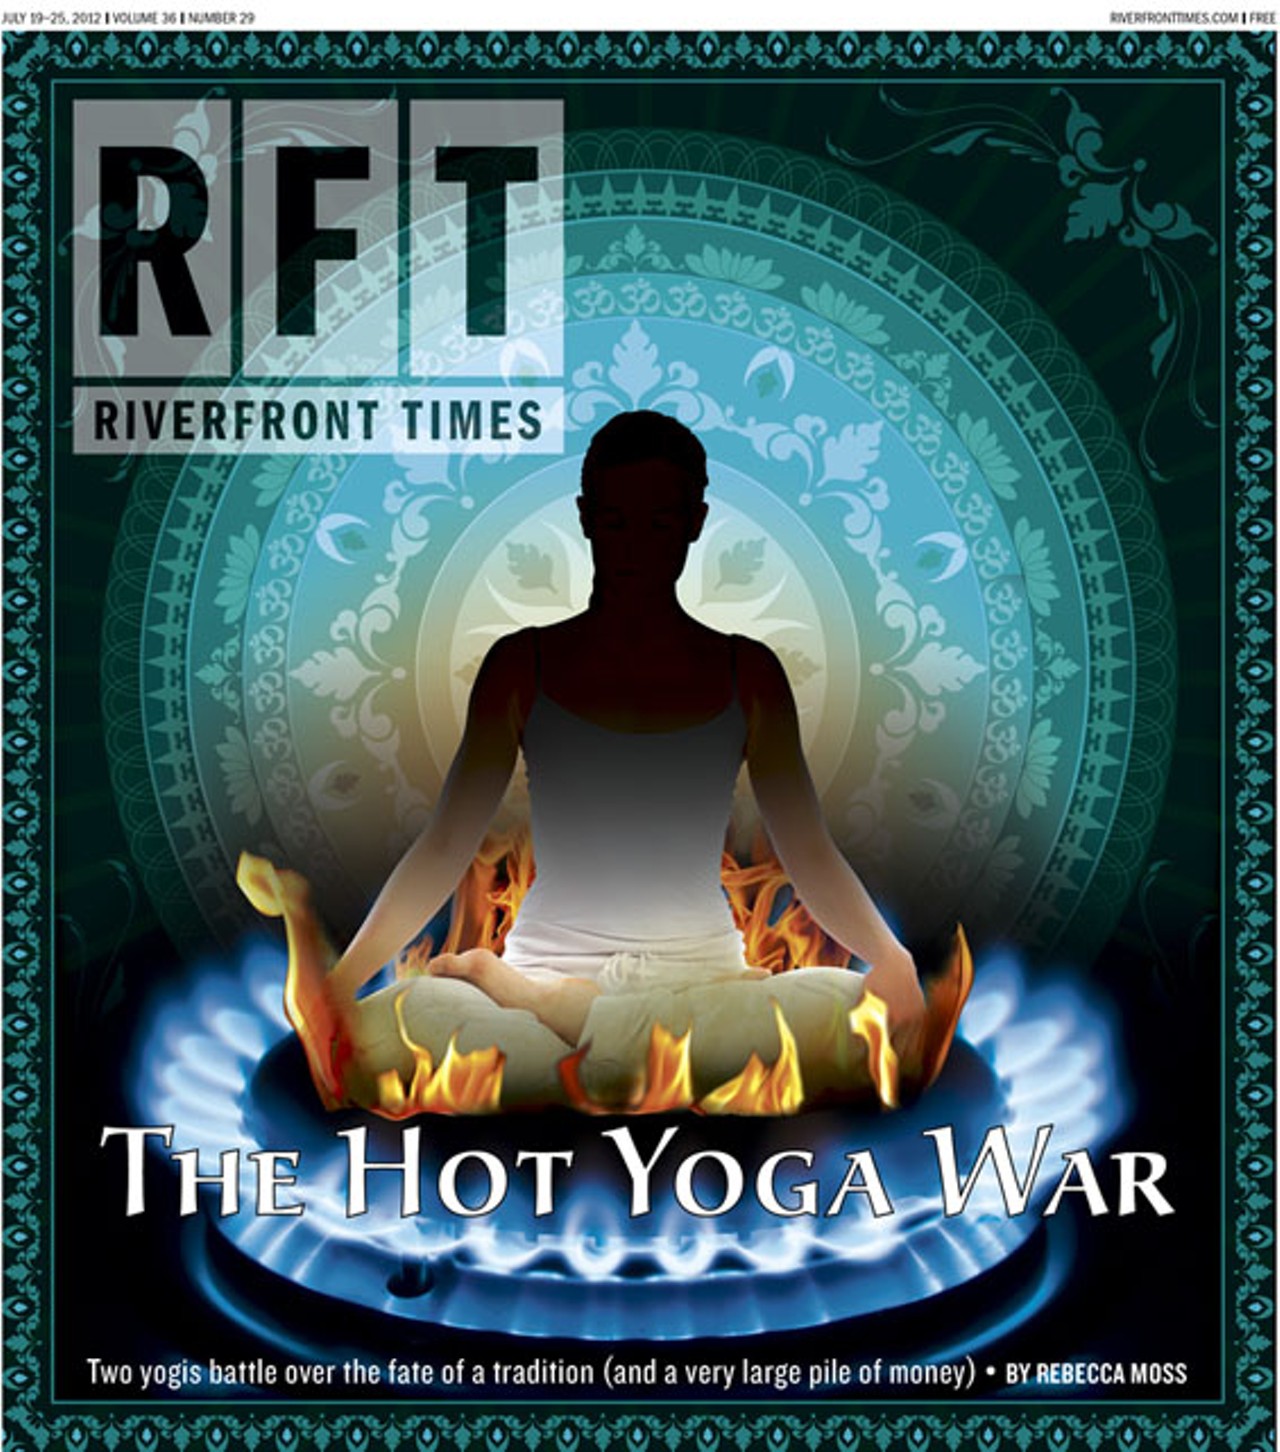 Hot Yoga War: Two yogis battle over the fate of a tradition (and a very large pile of money) by Rebecca Moss in the July 19 issue. Cover: RFT Photo-Illustration.